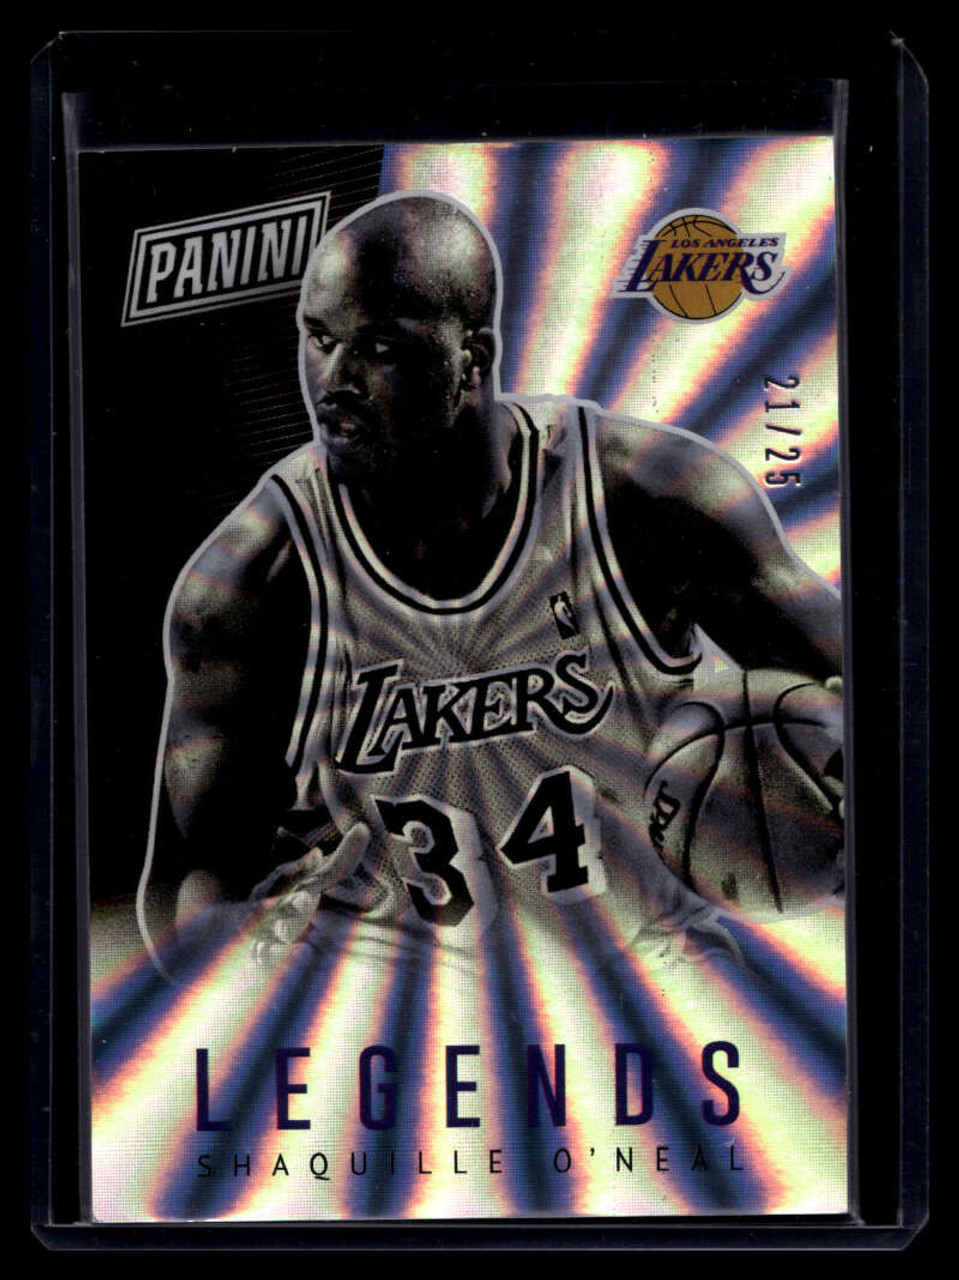 2017 Panini National Convention Rainbow Spokes Thick Shaquille O'Neal 21/25